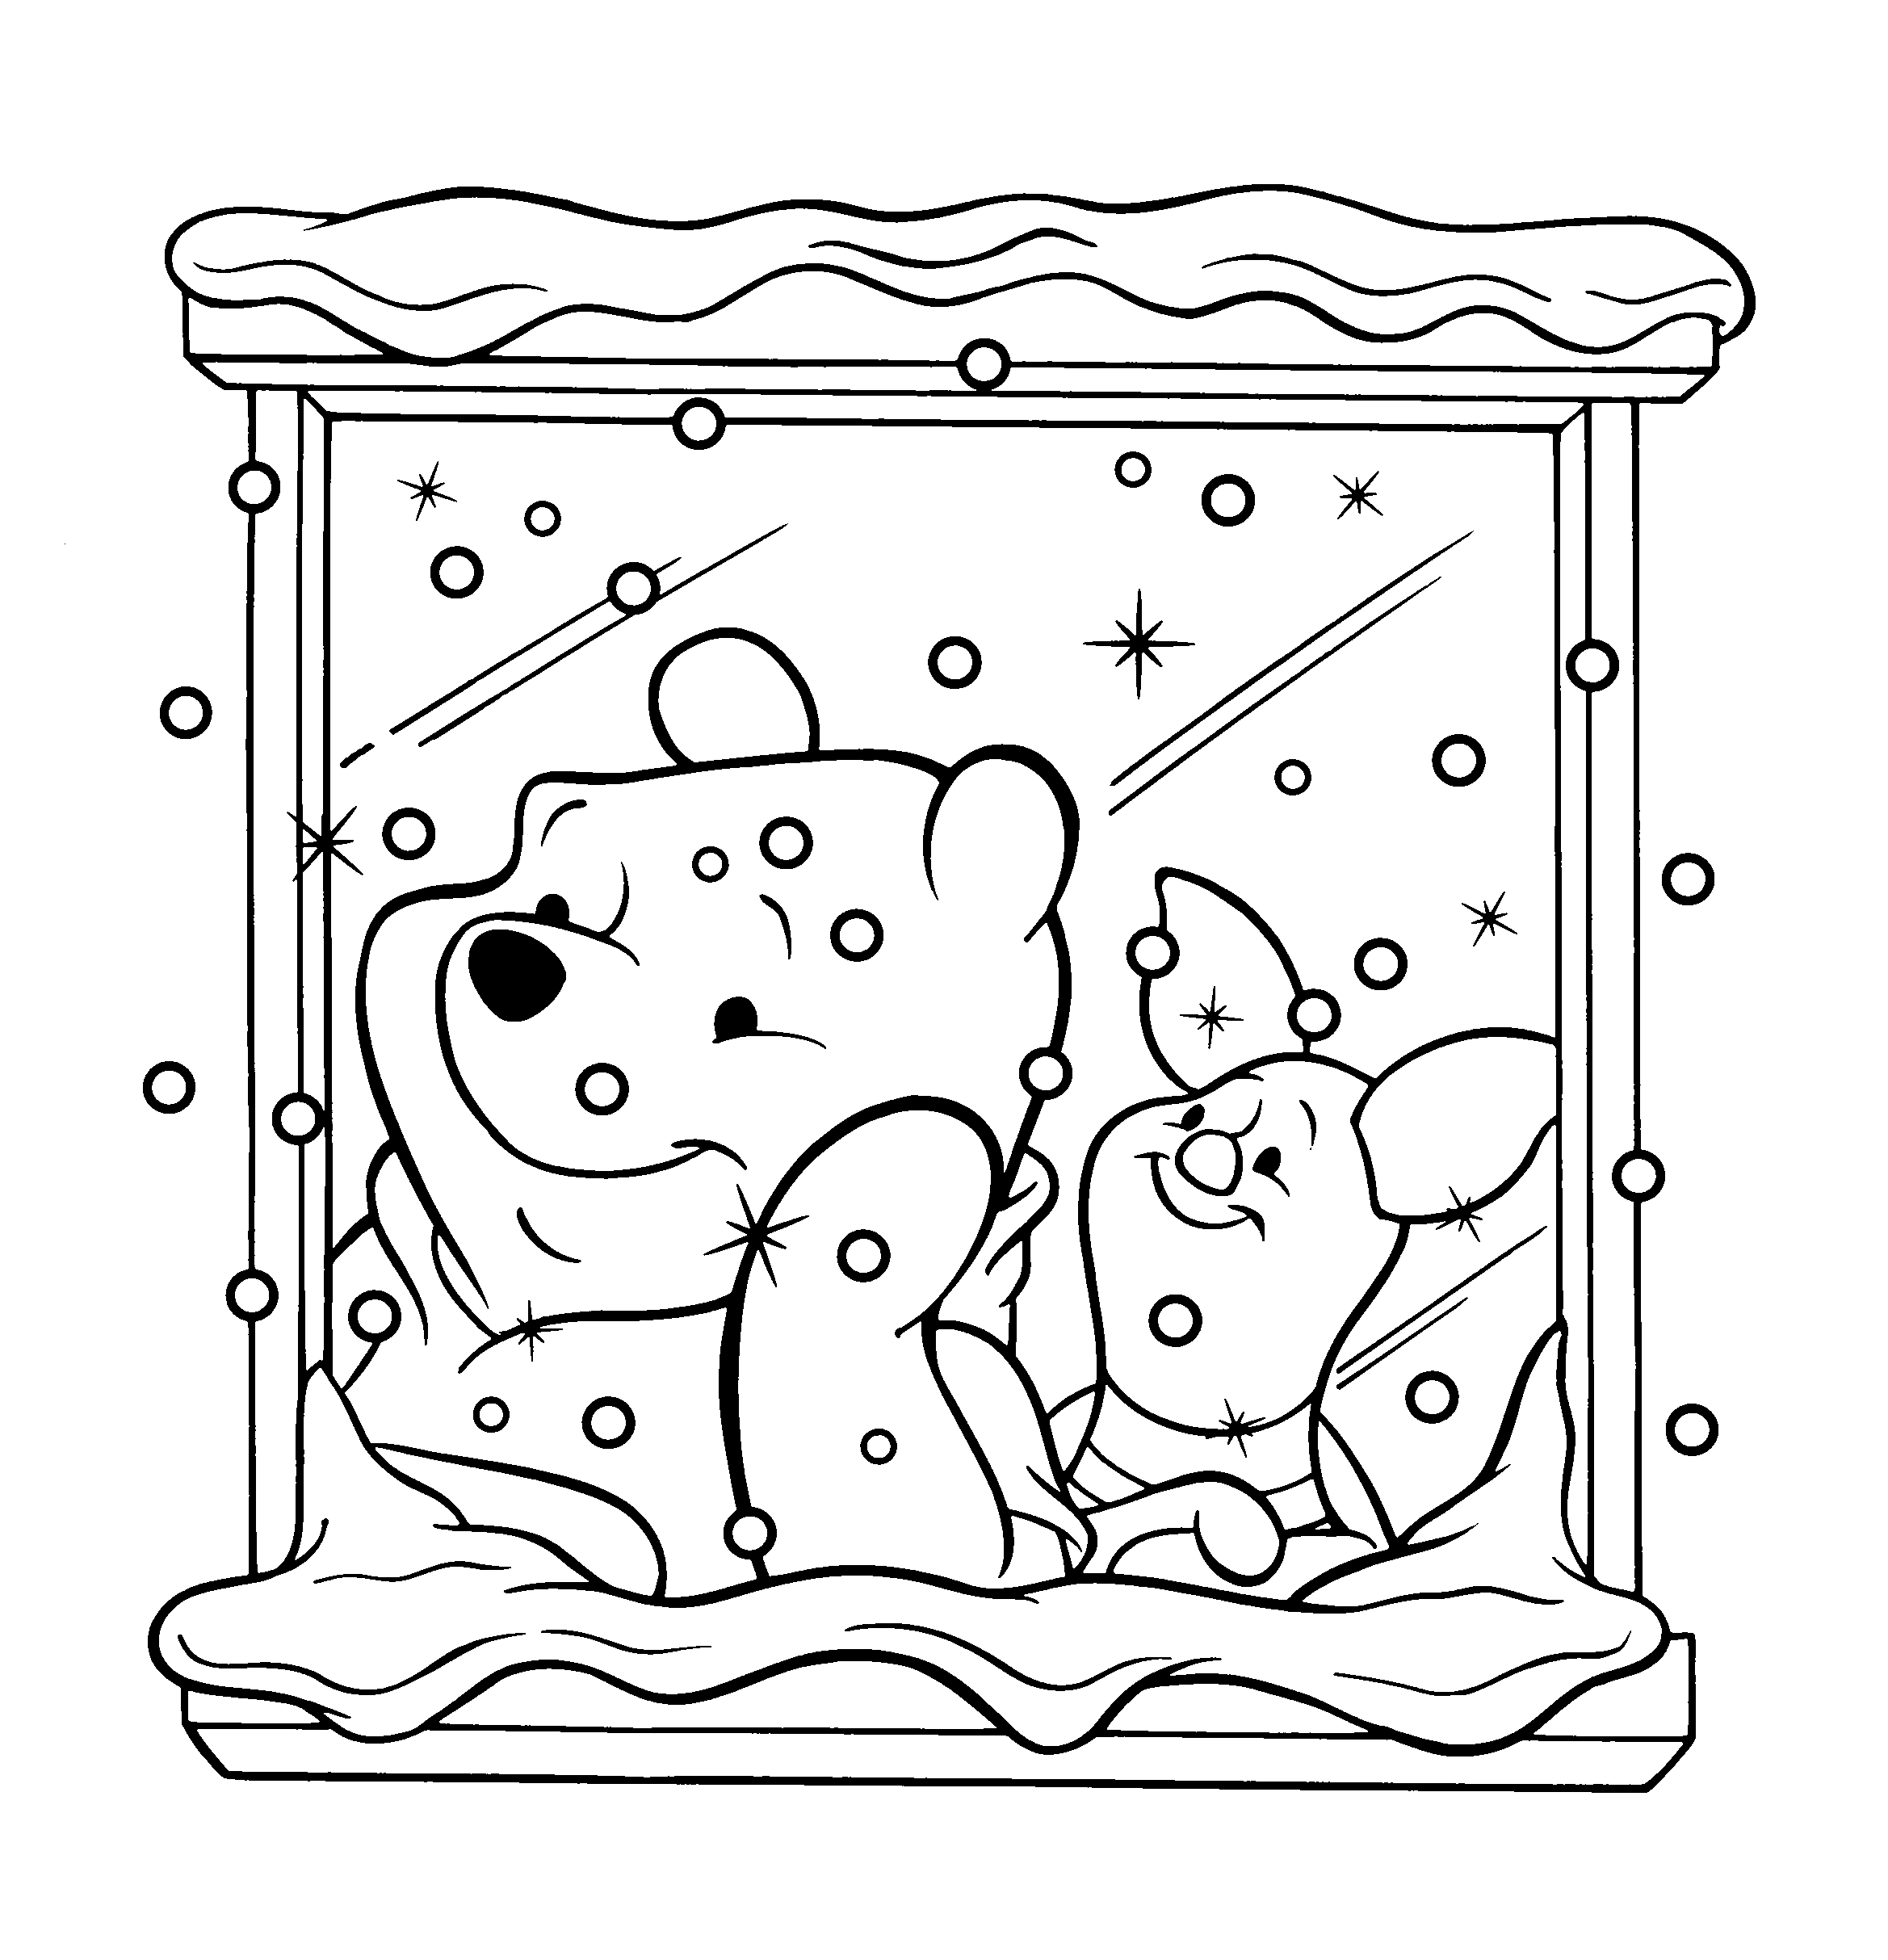 Pooh And Piglet Looking At The Snow Coloring Page